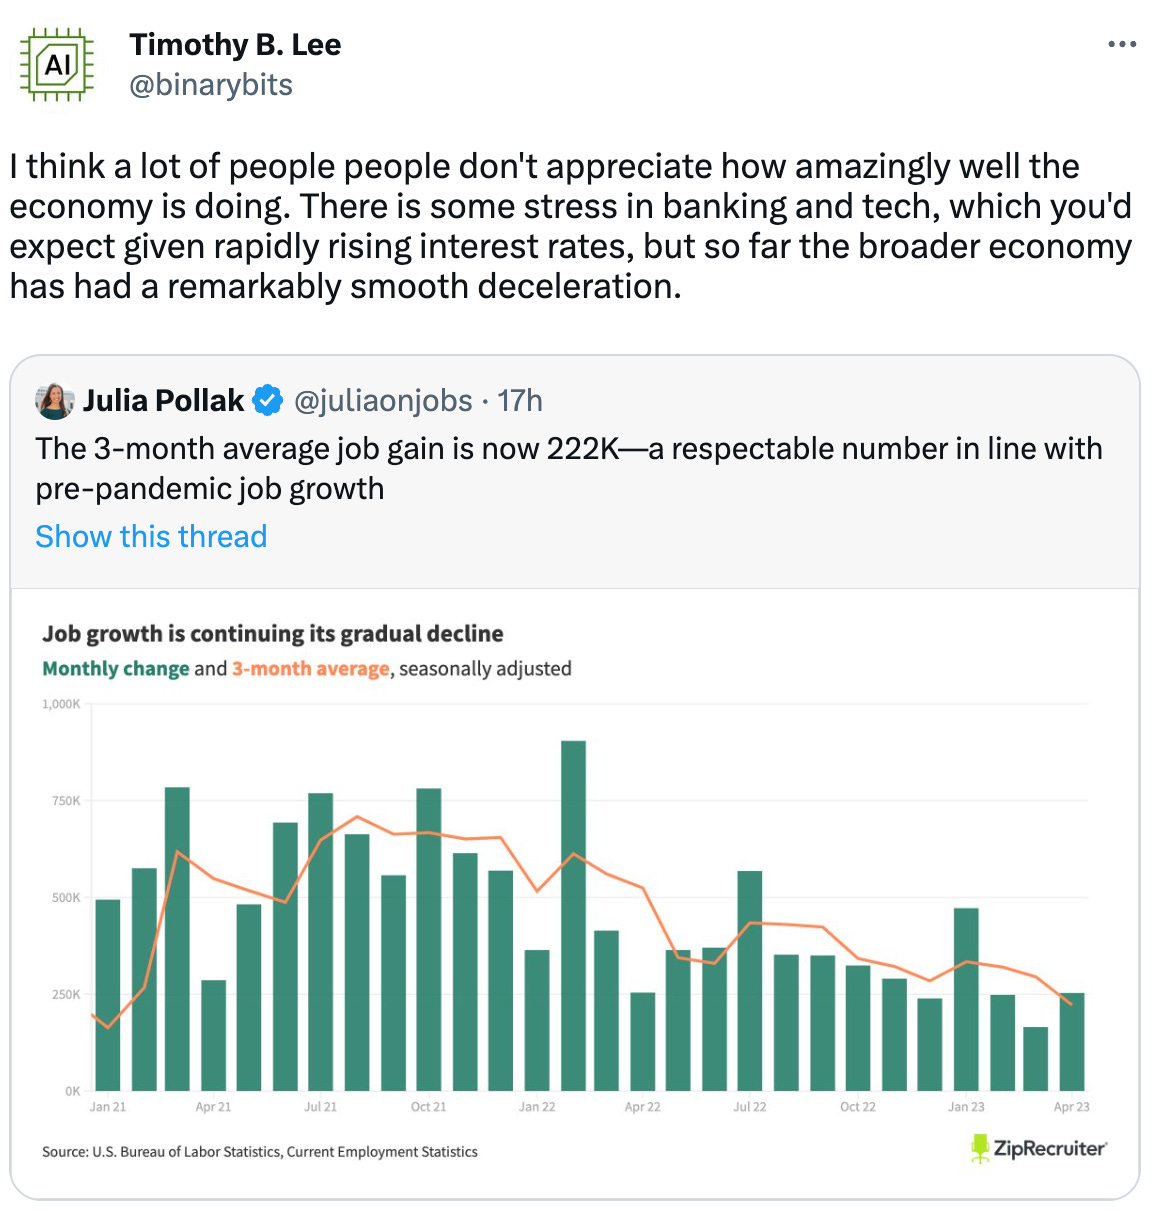  Timothy B. Lee @binarybits I think a lot of people people don't appreciate how amazingly well the economy is doing. There is some stress in banking and tech, which you'd expect given rapidly rising interest rates, but so far the broader economy has had a remarkably smooth deceleration. Quote Tweet Julia Pollak @juliaonjobs · 17h The 3-month average job gain is now 222K—a respectable number in line with pre-pandemic job growth Show this thread